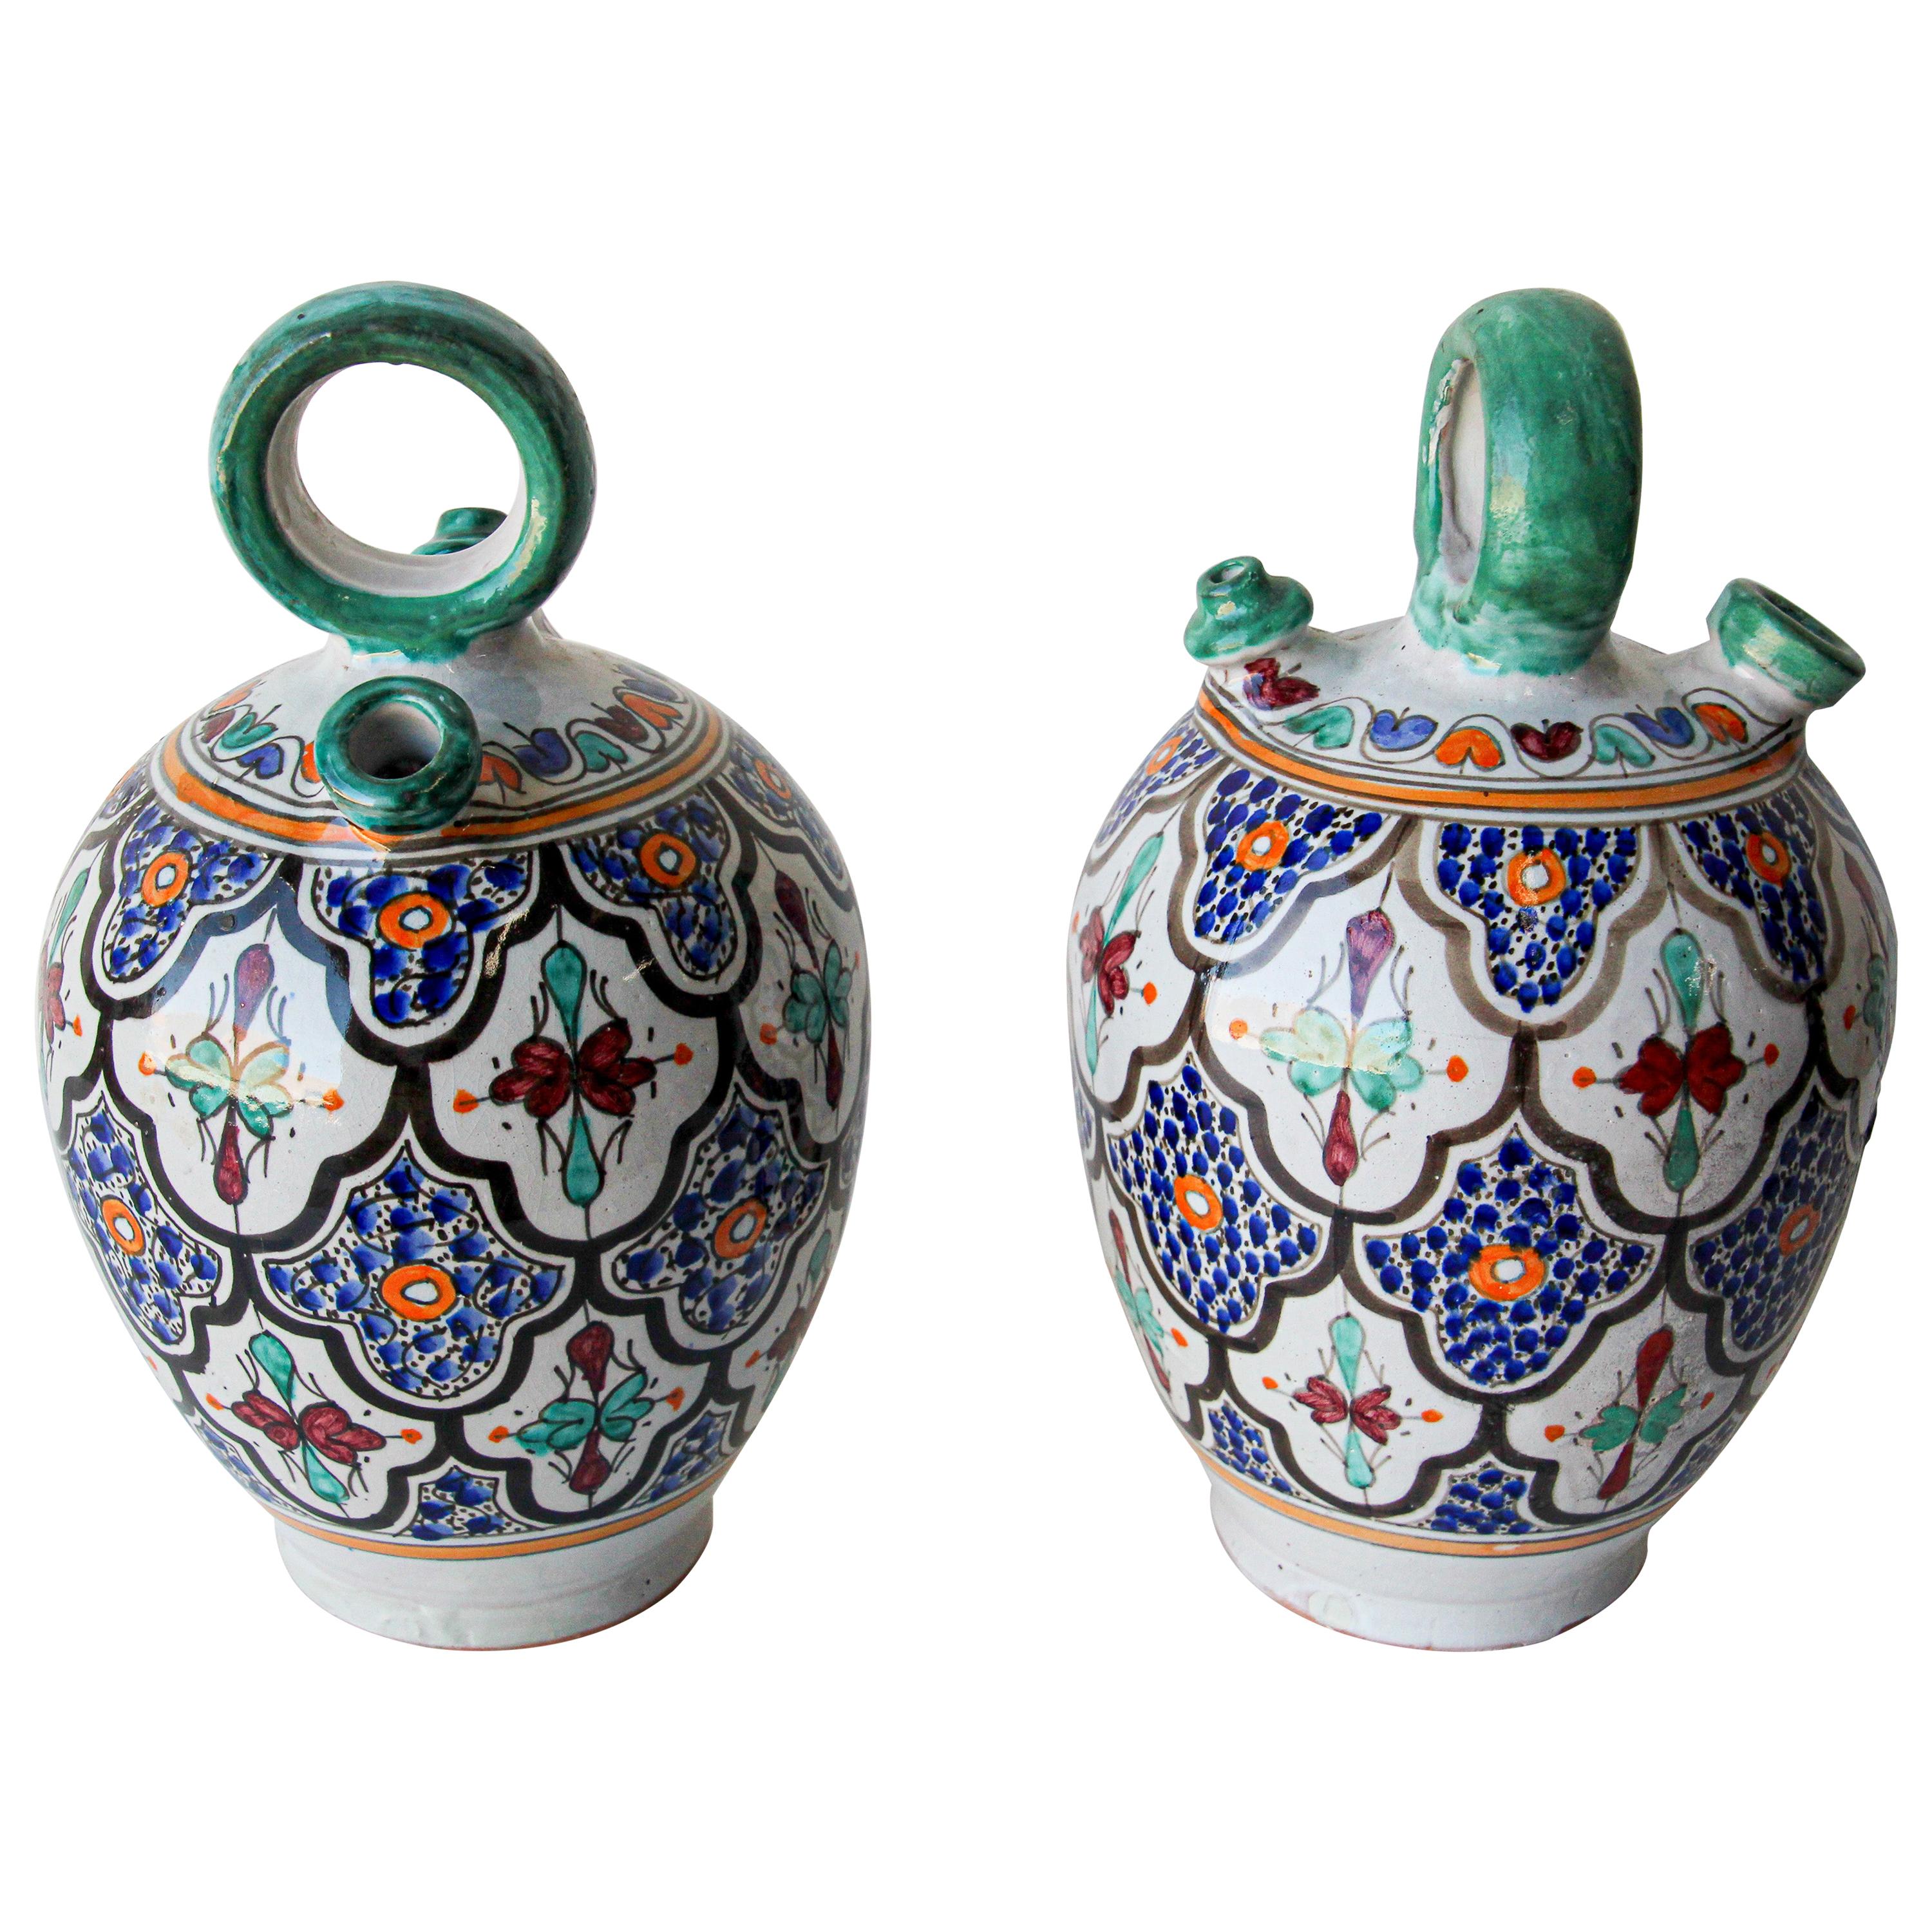 Moorish Ceramic Glazed Water Jug Handcrafted in Fez Morocco For Sale